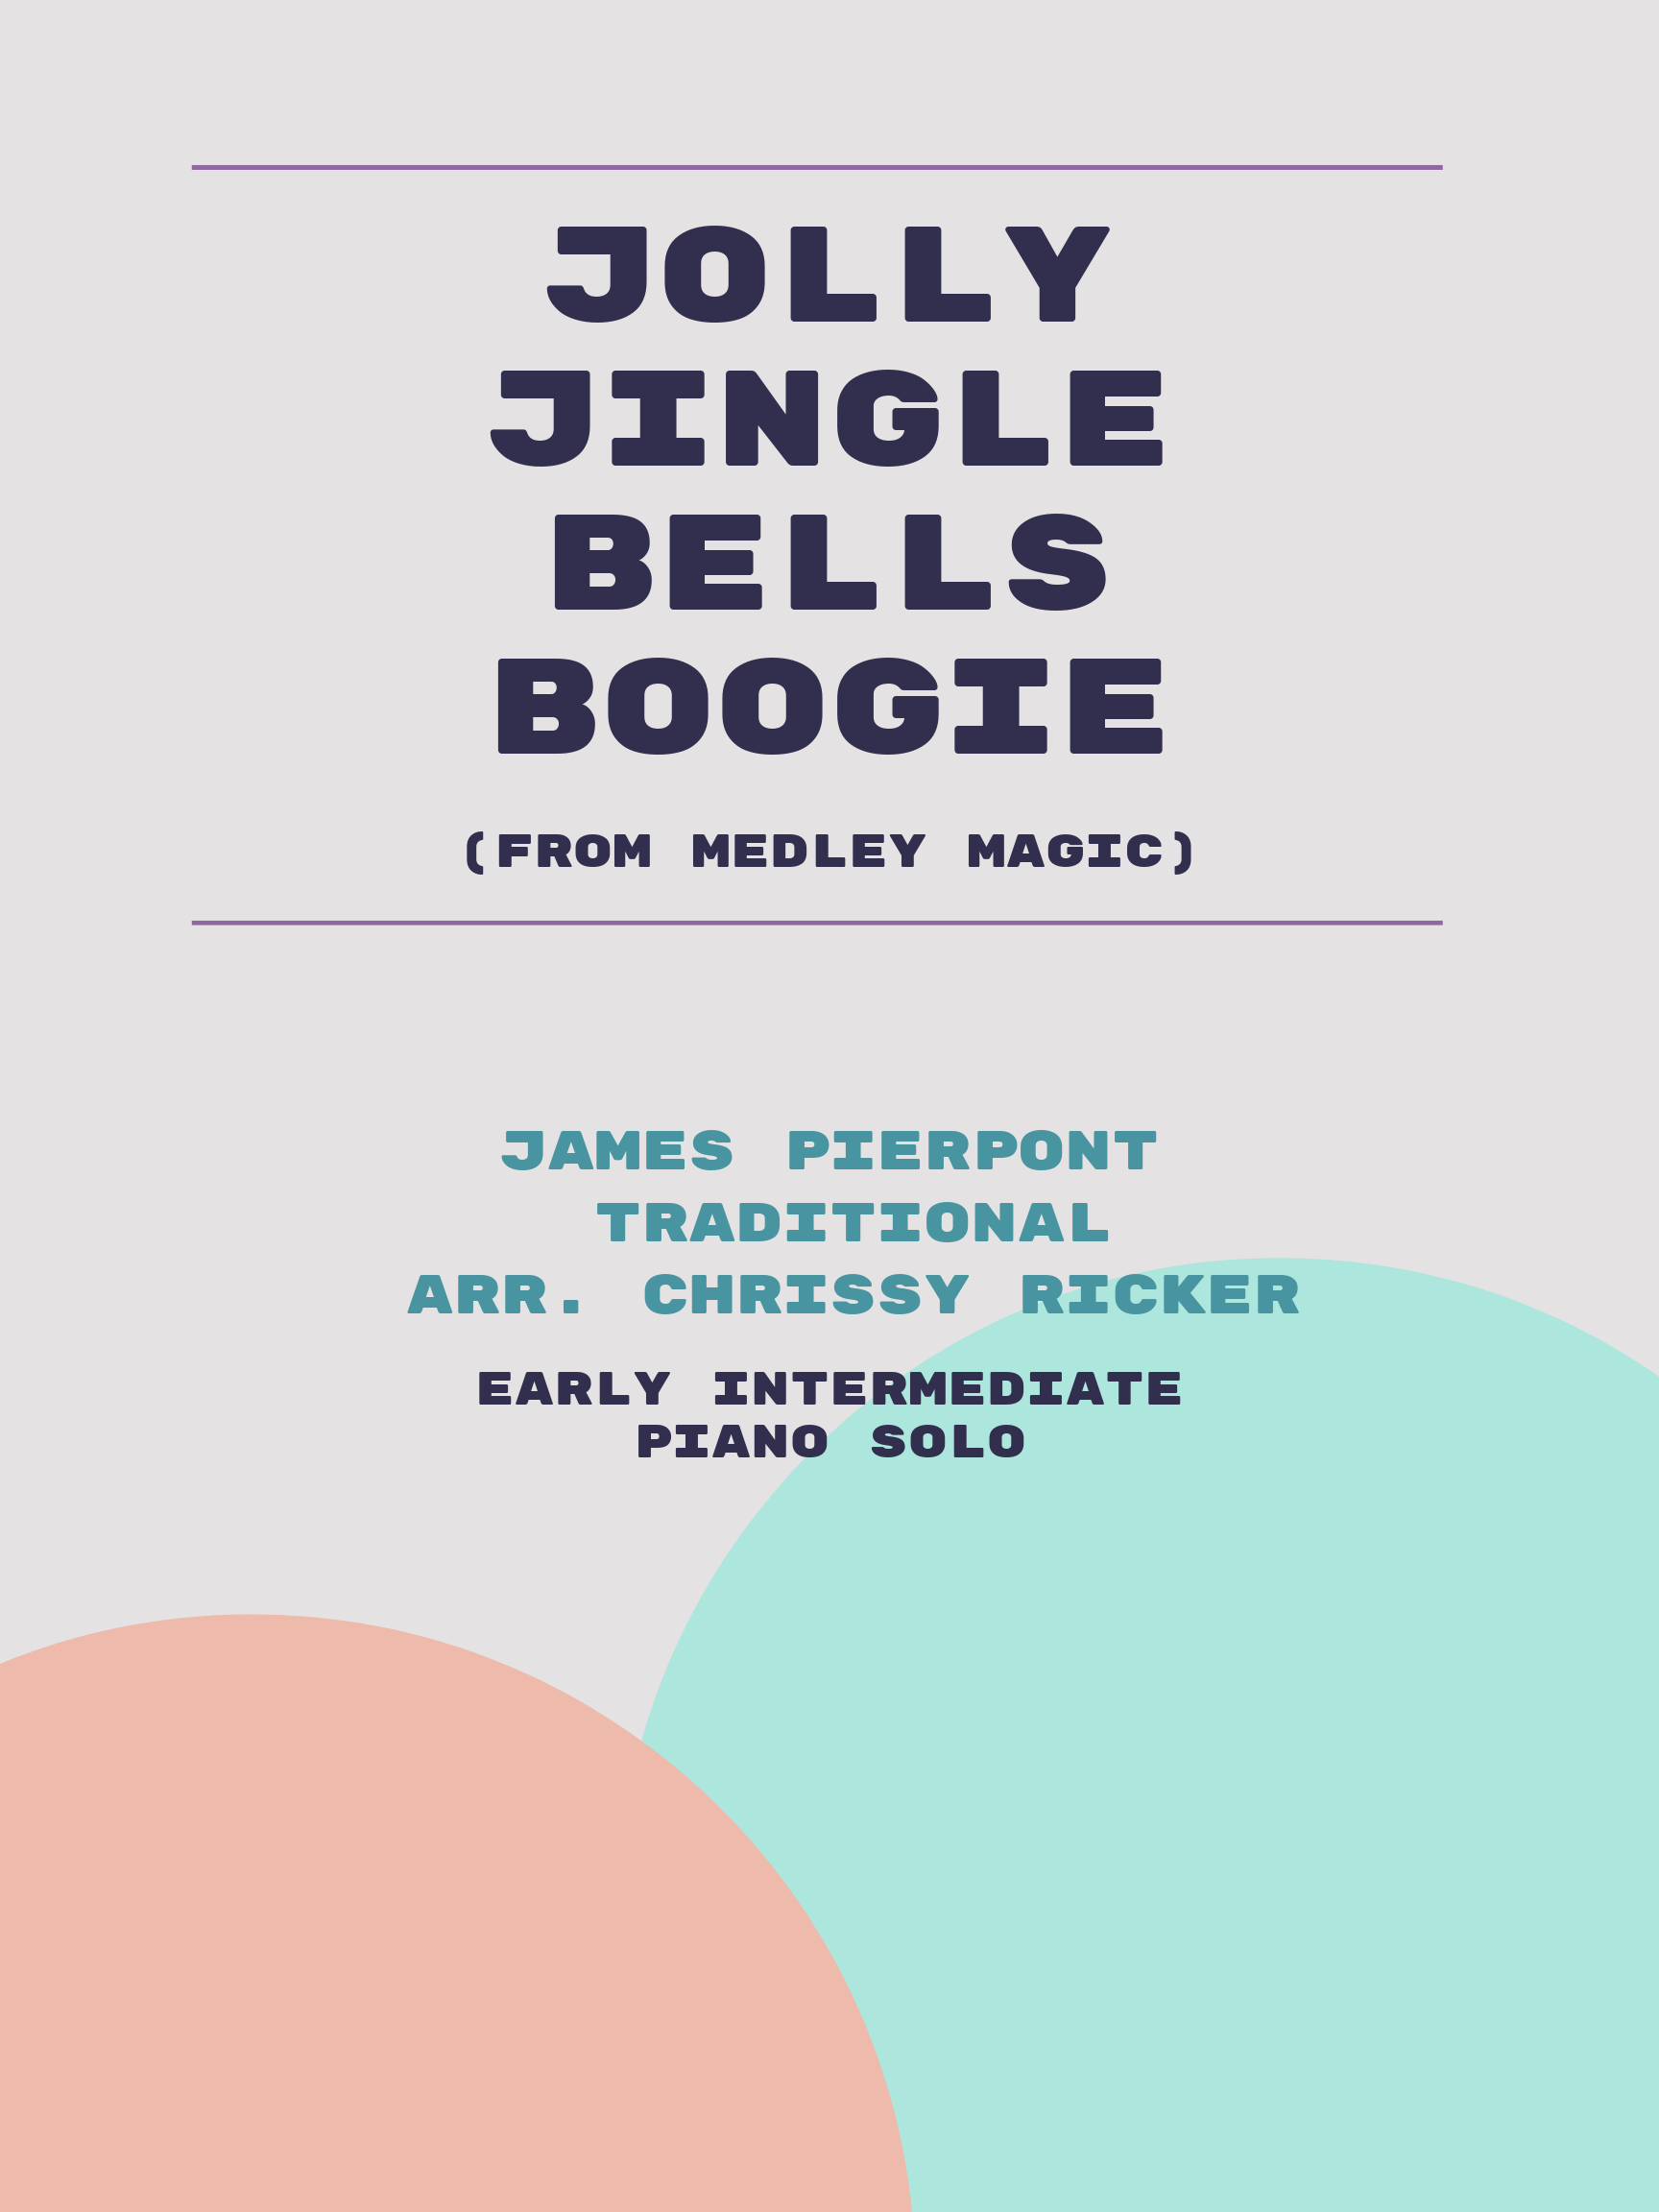 Jolly Jingle Bells Boogie by James Pierpont, Traditional